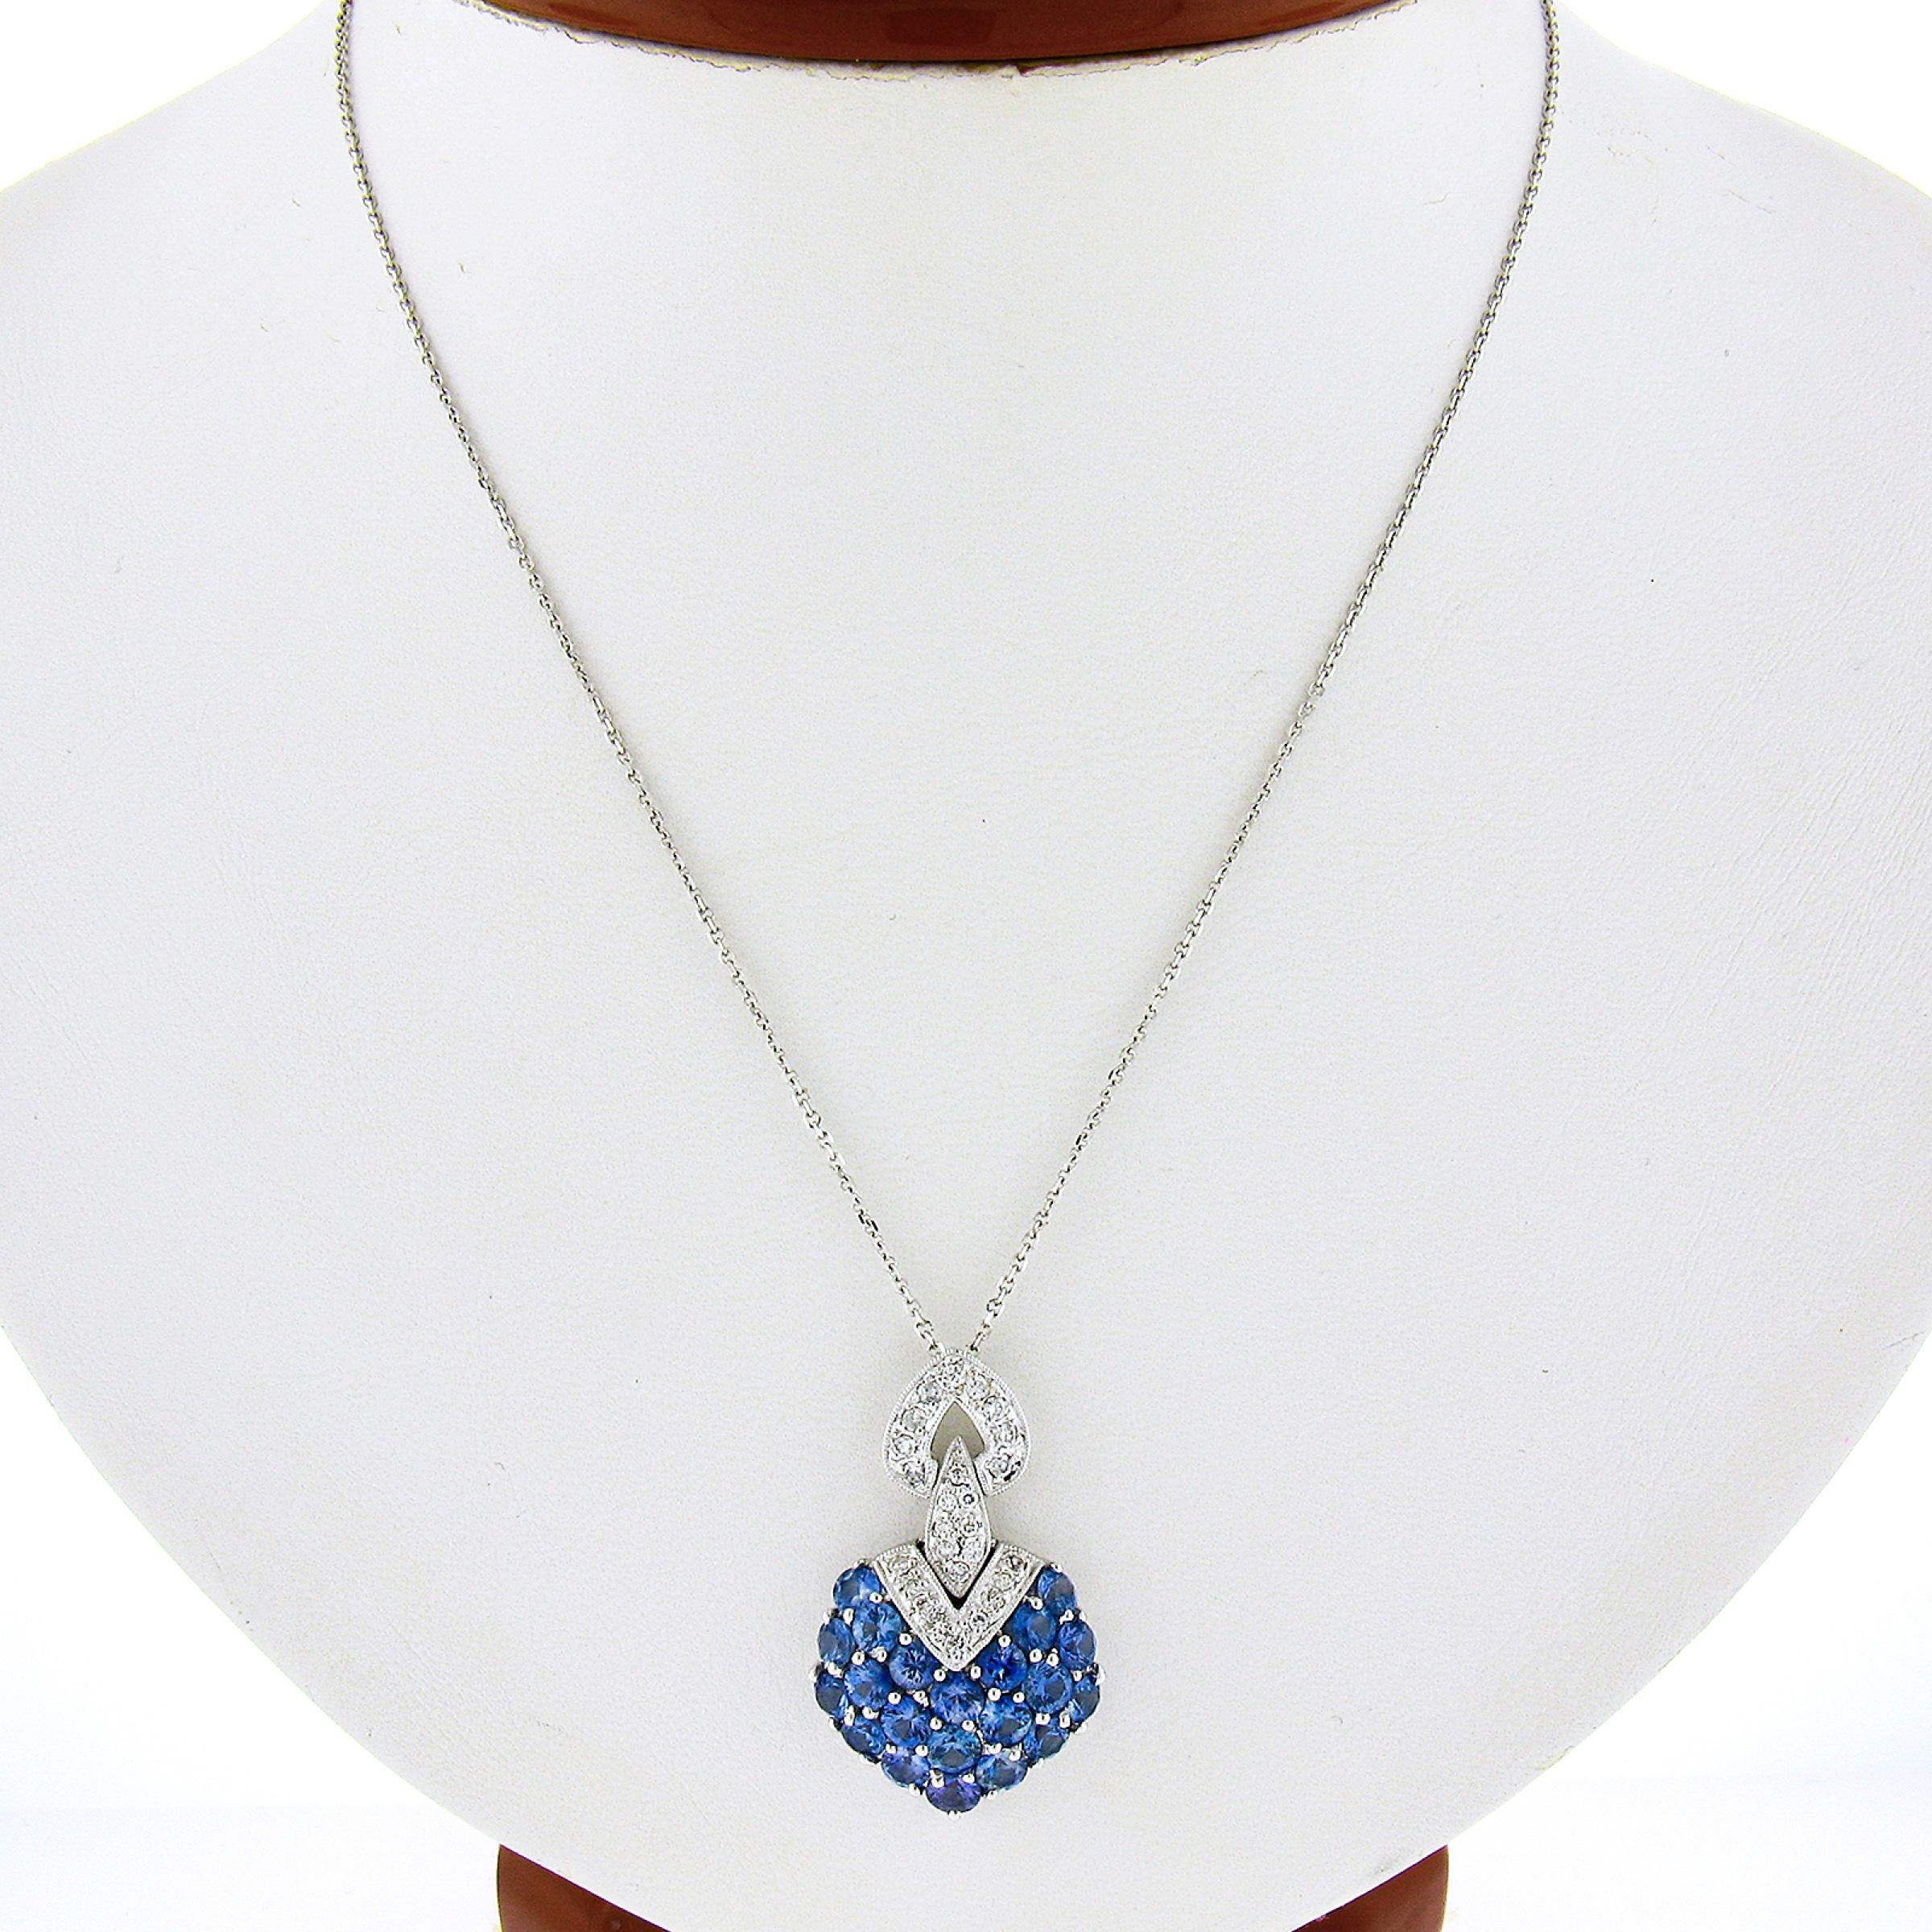 This stunning pendant is crafted in solid 18k white gold and is completely drenched with gorgeous sapphires and diamonds throughout throughout its slightly domed design. The cluster of round brilliant cut sapphires weigh approximately 4 carats in